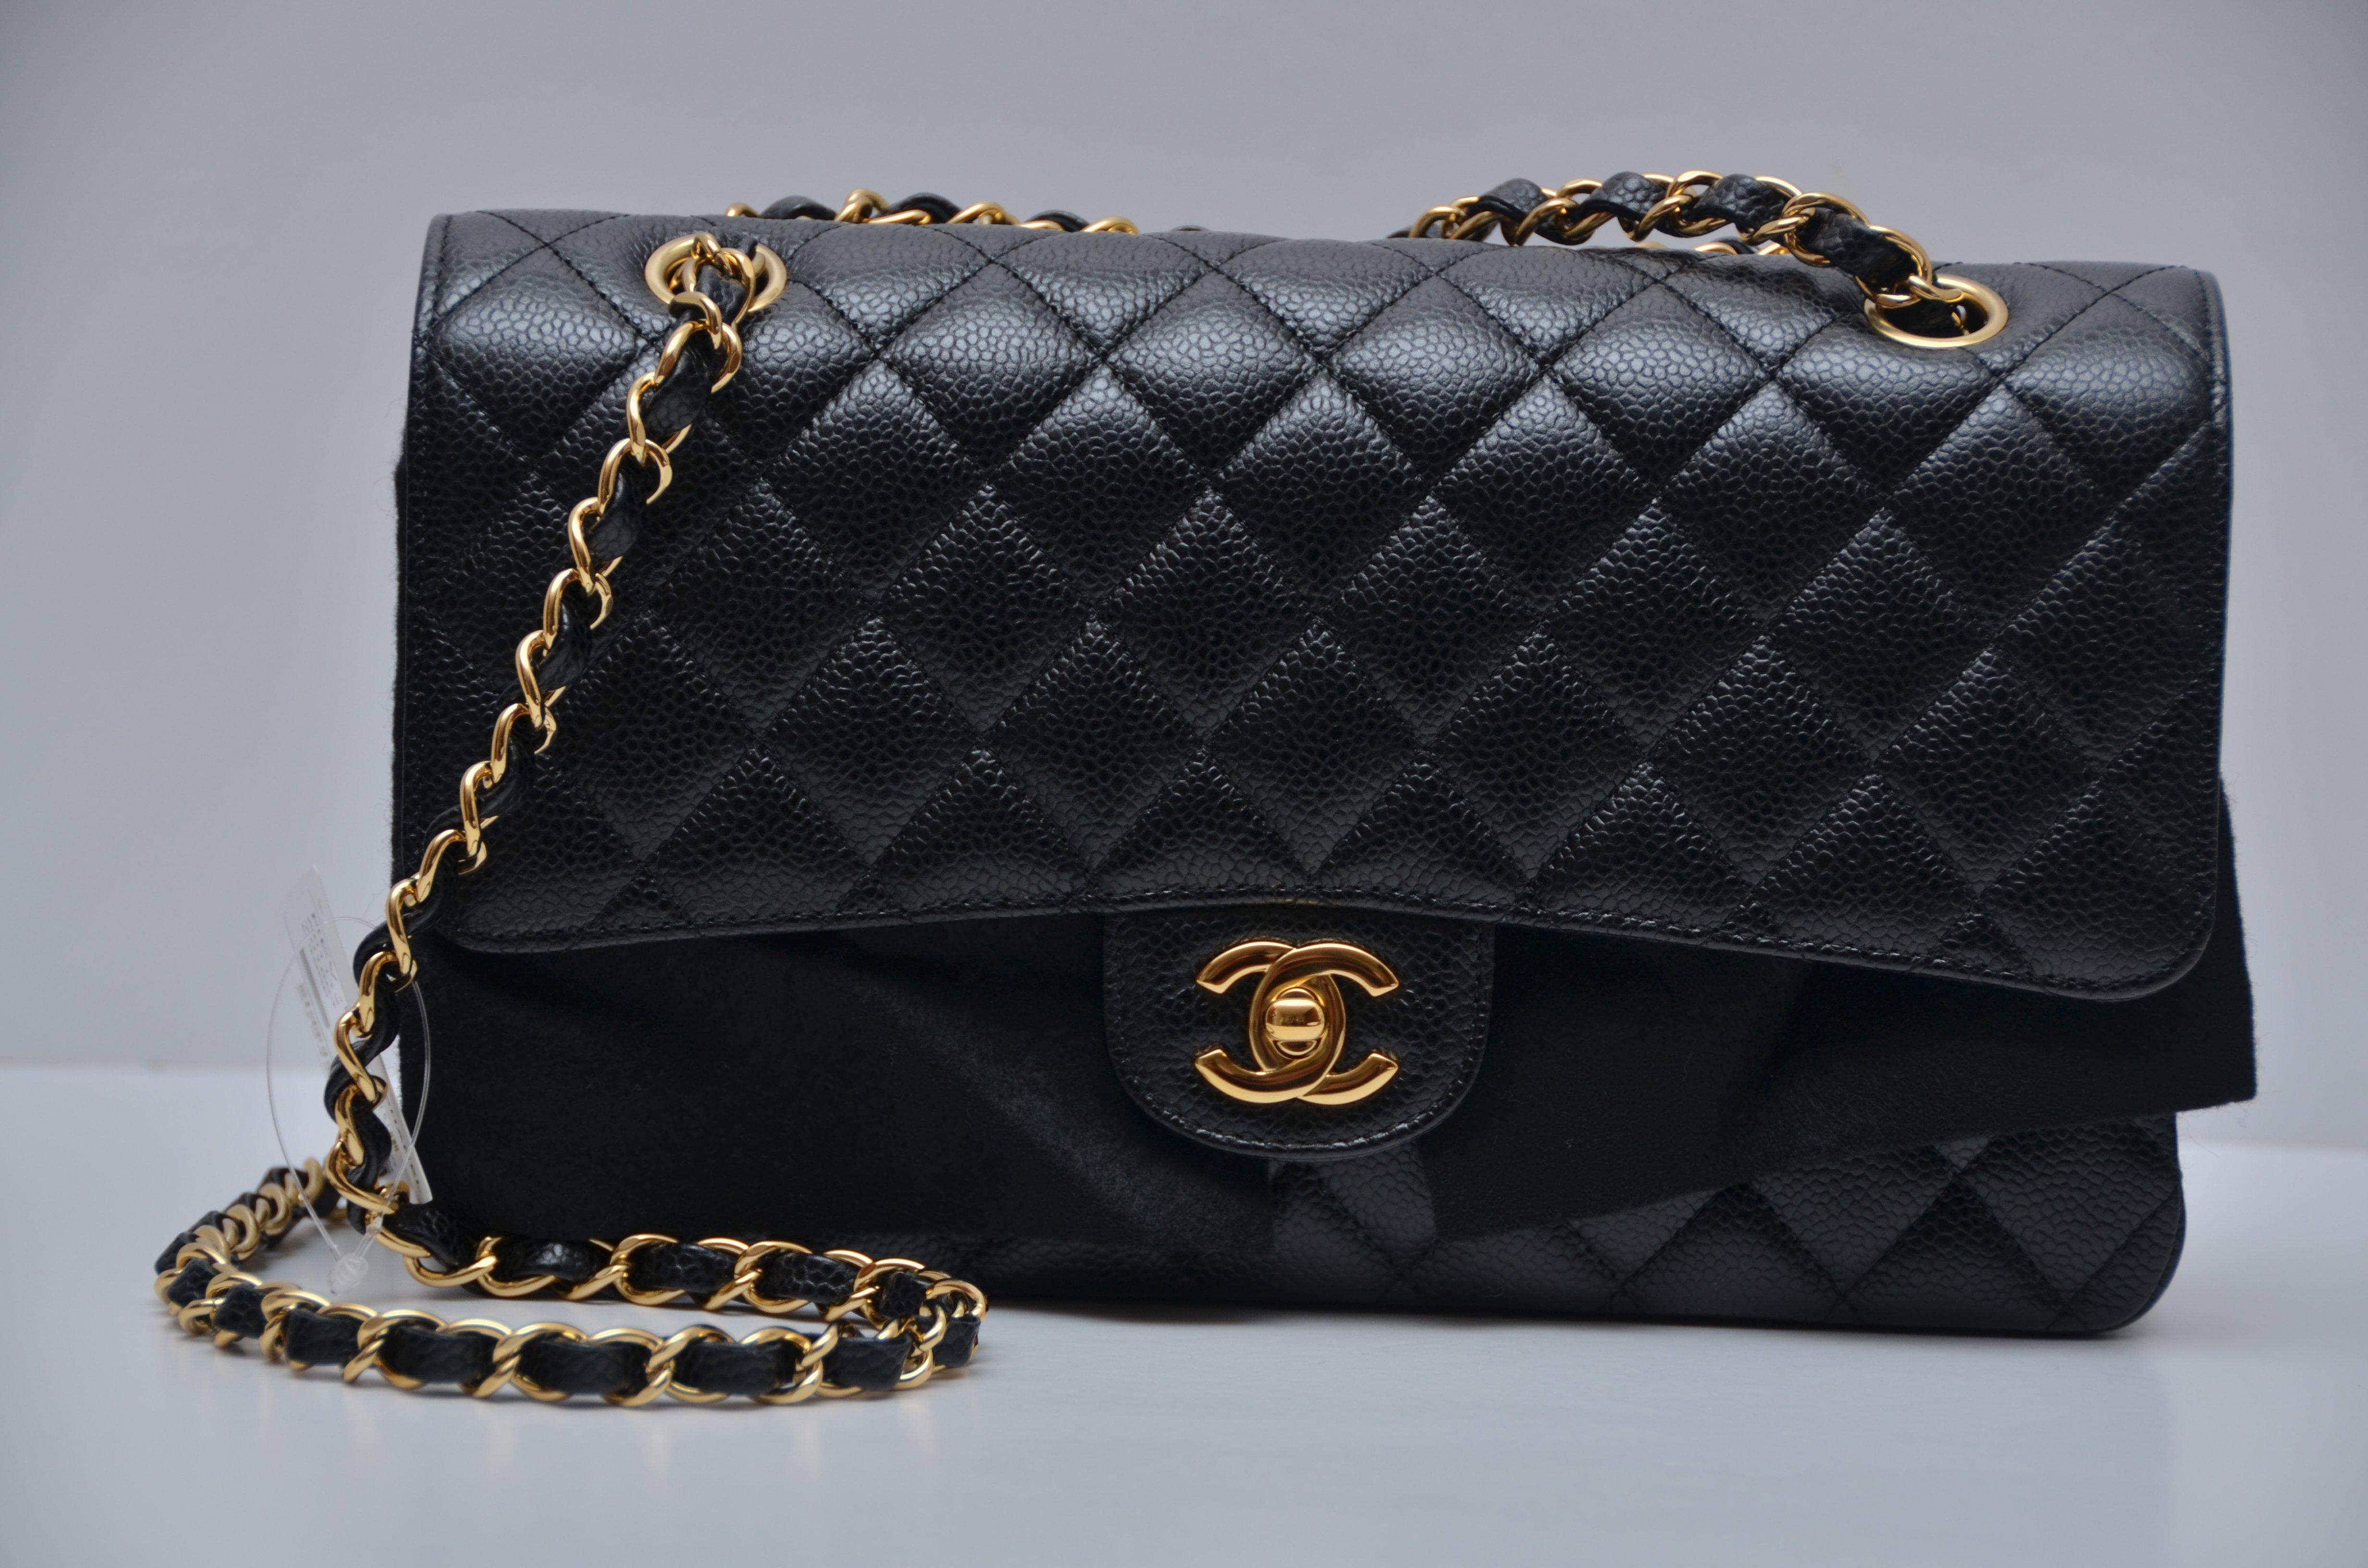 CHANEL Classic Double Flap Medium Shoulder Bag Black Caviar BRAND NEW With T GHW 2